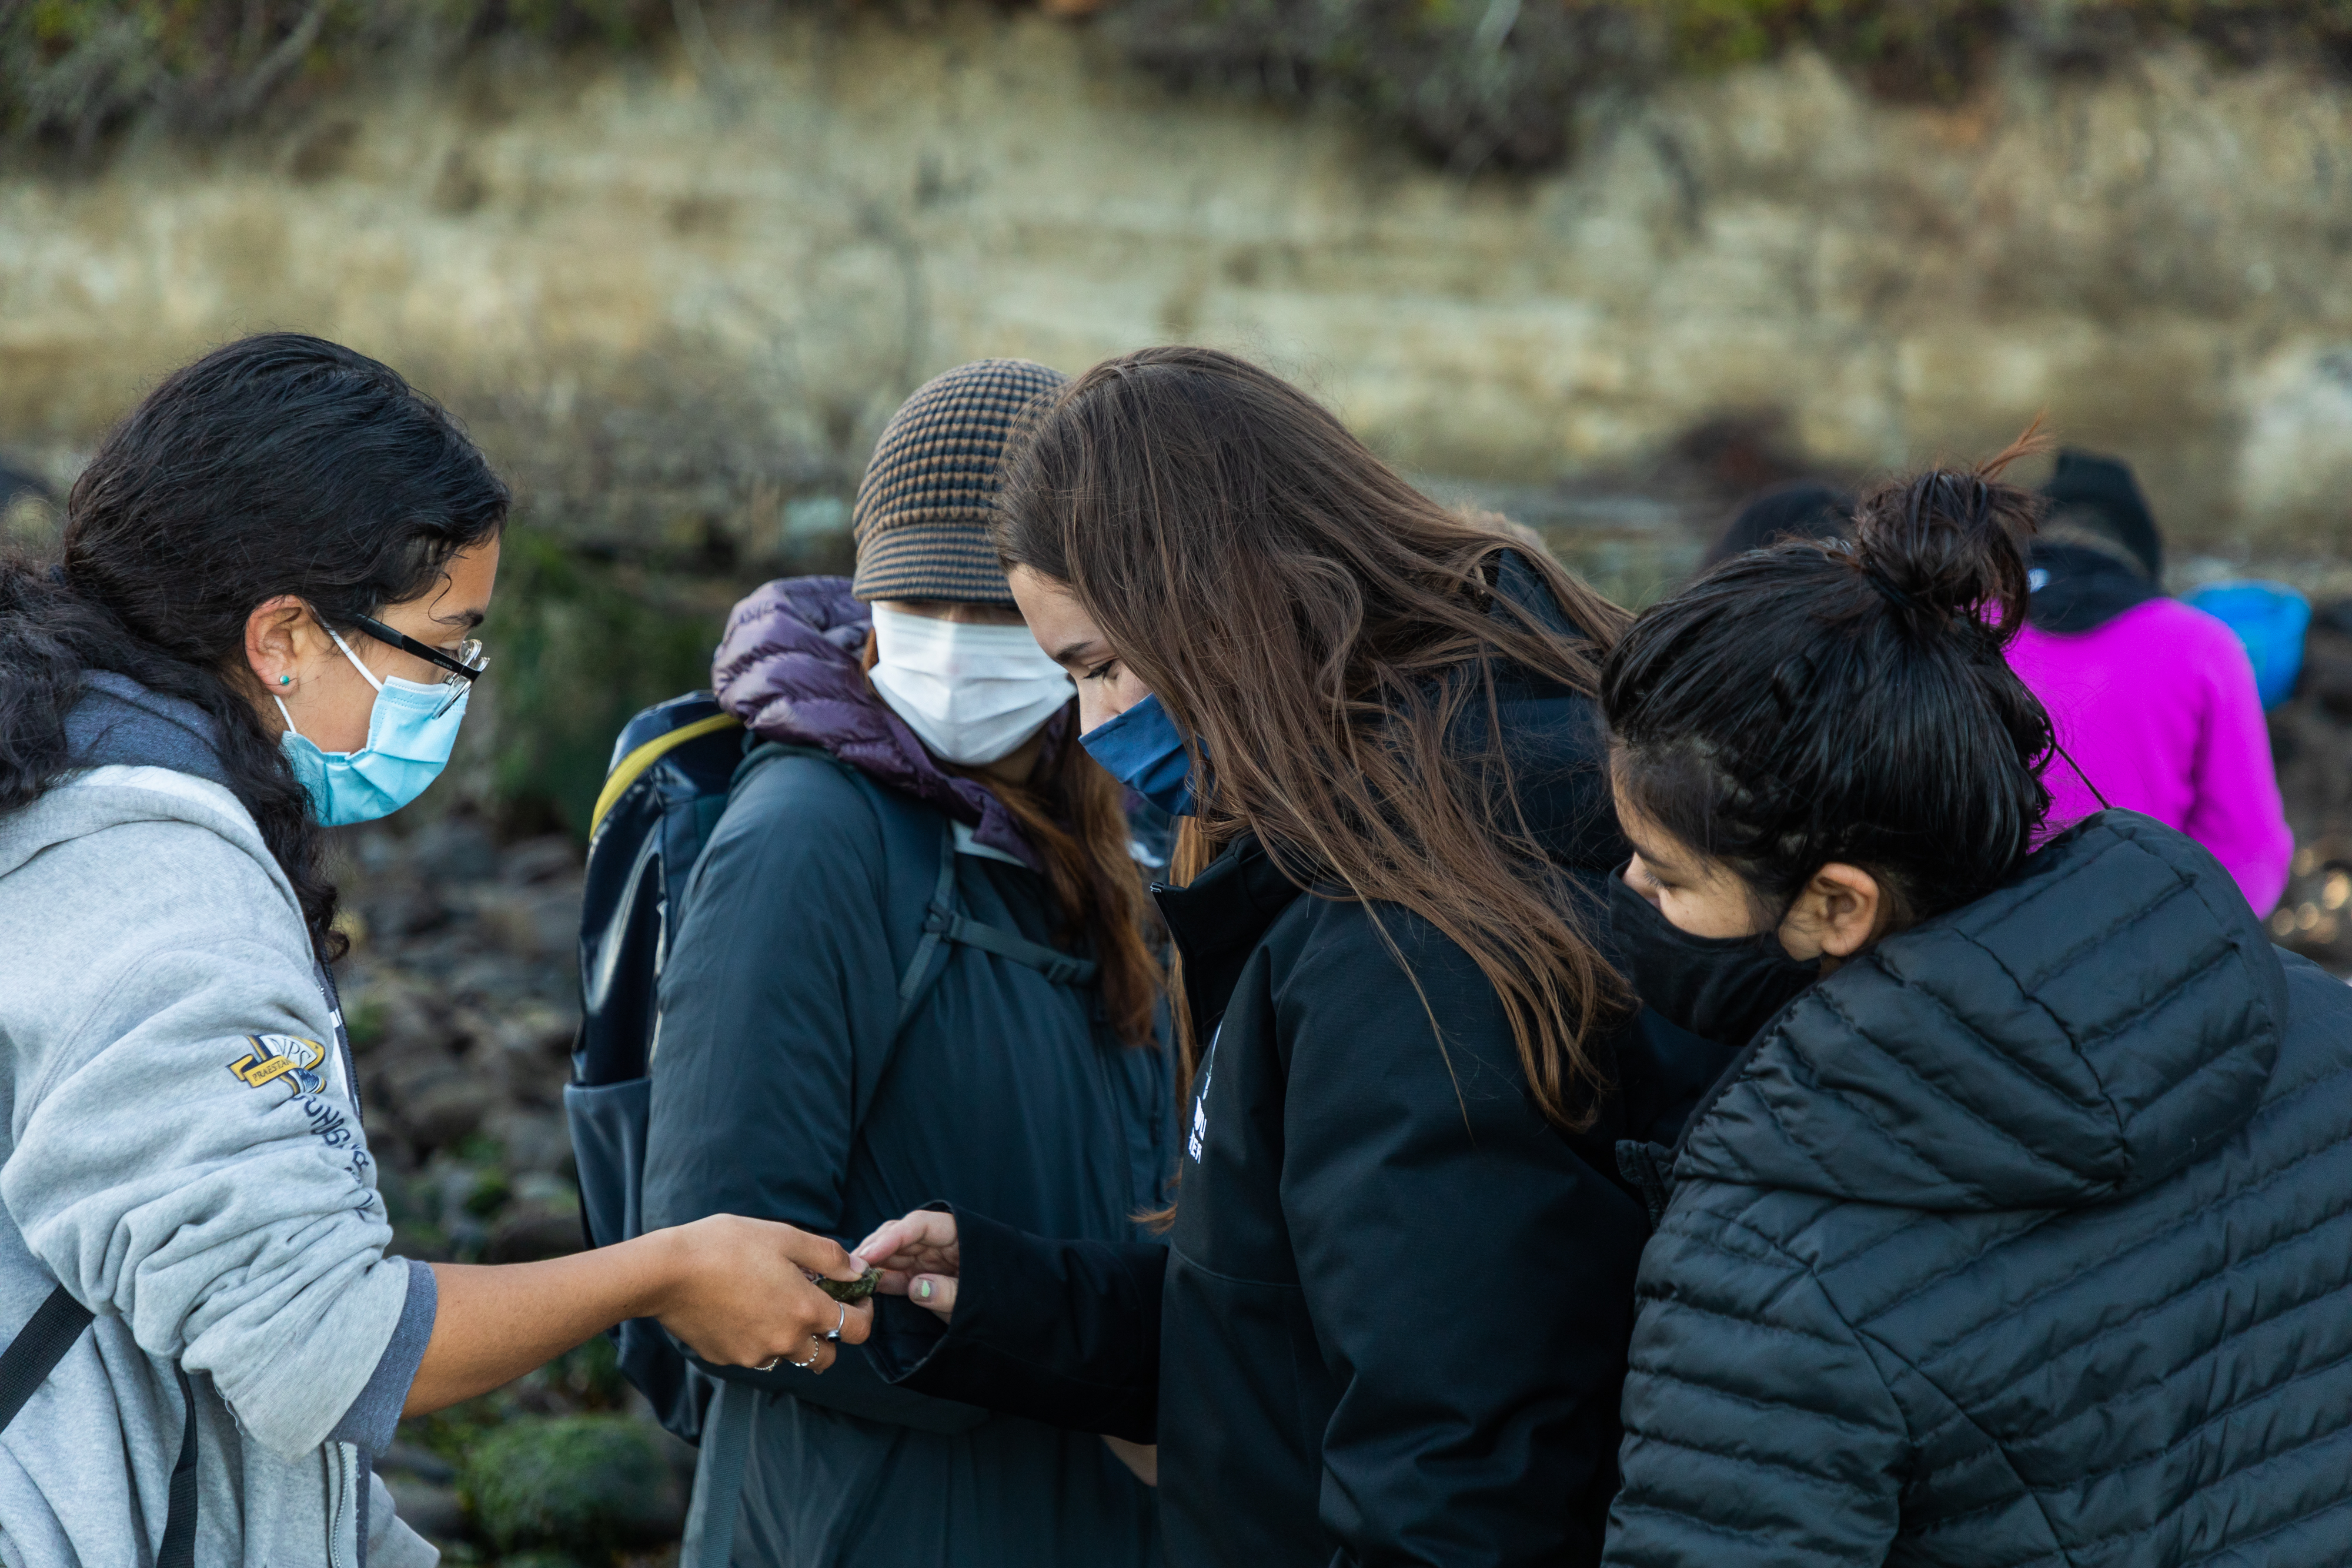 Casey, surrounded by students on a beach, looks at an item in another student's hand. 